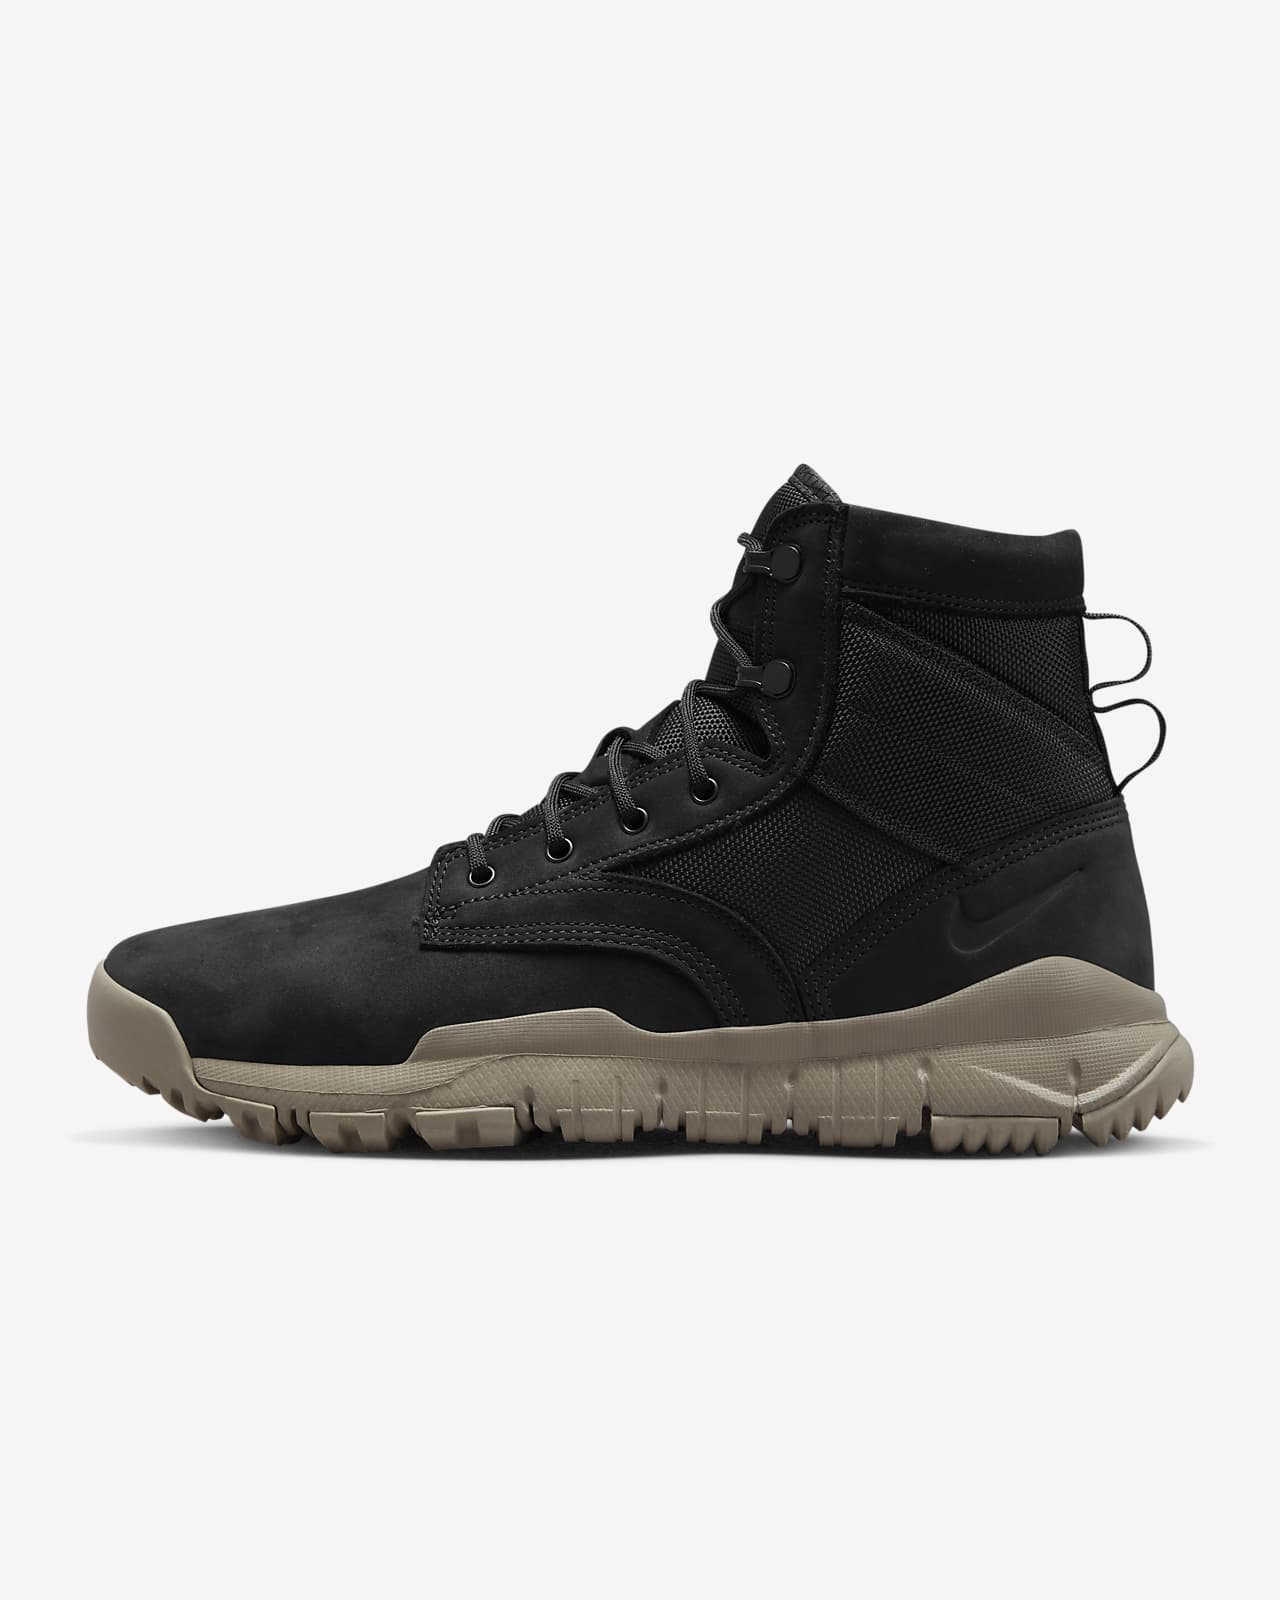 Nike SFB 6" Leather Men's Boot